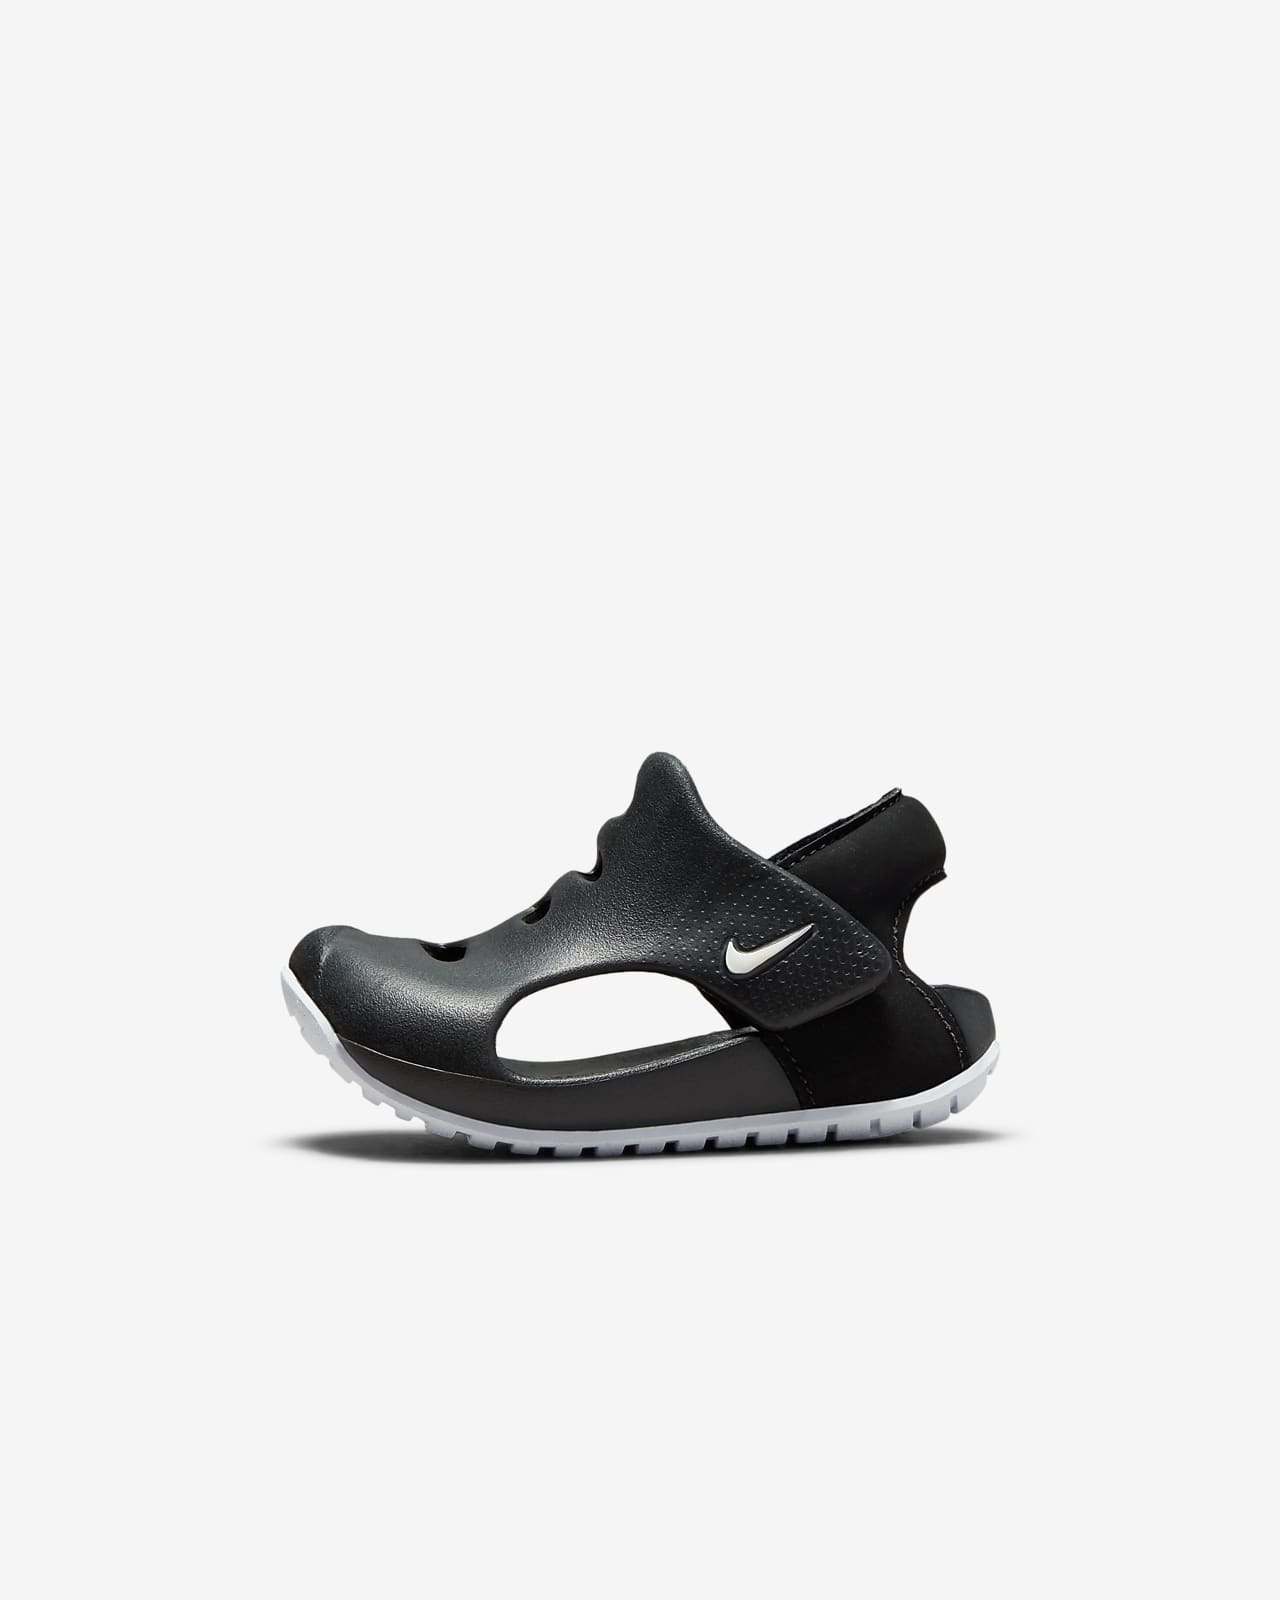 Nike Sunray Protect 3 Baby & Toddler Sandals